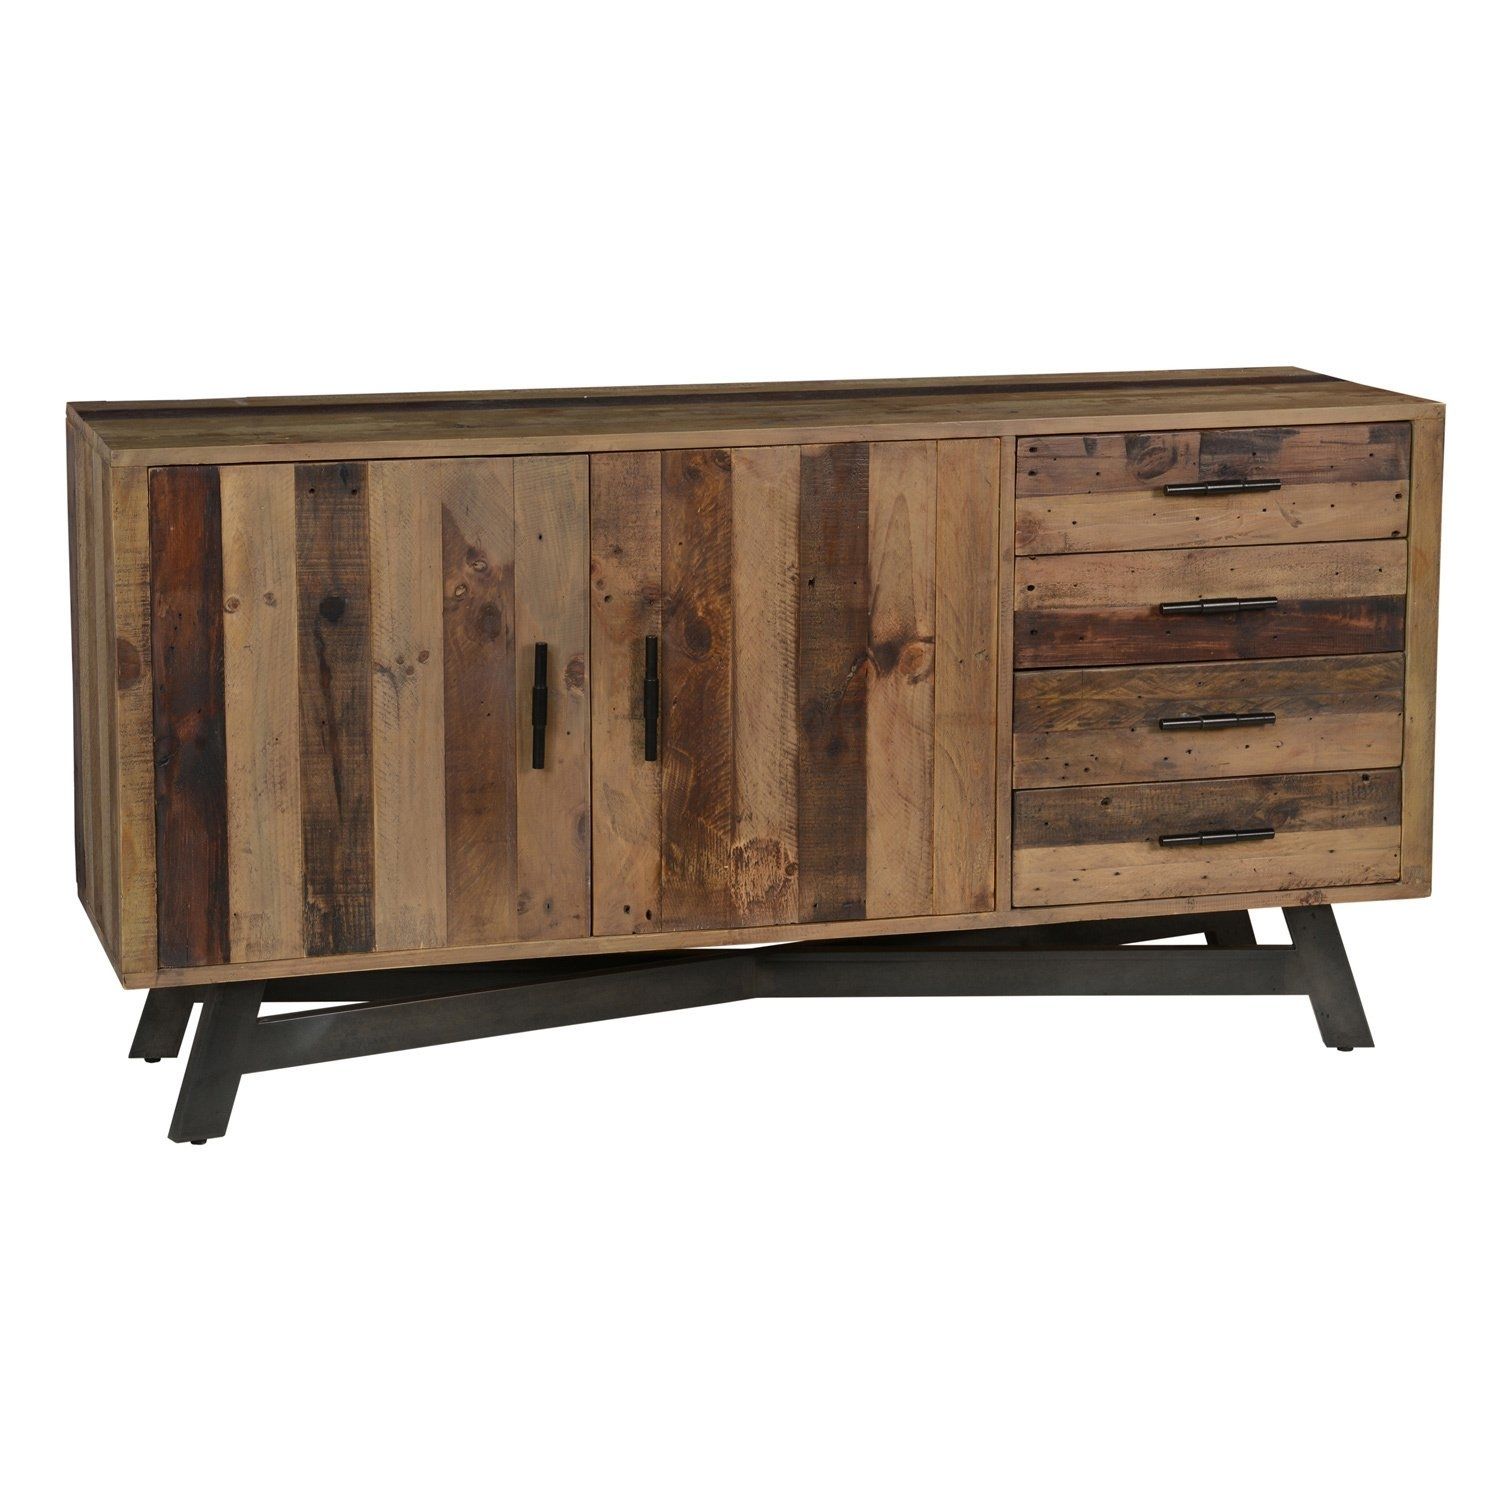 Shop Holden Reclaimed Wood 65 Inch Sideboardkosas Home – Free Pertaining To Reclaimed Sideboards With Metal Panel (View 8 of 30)